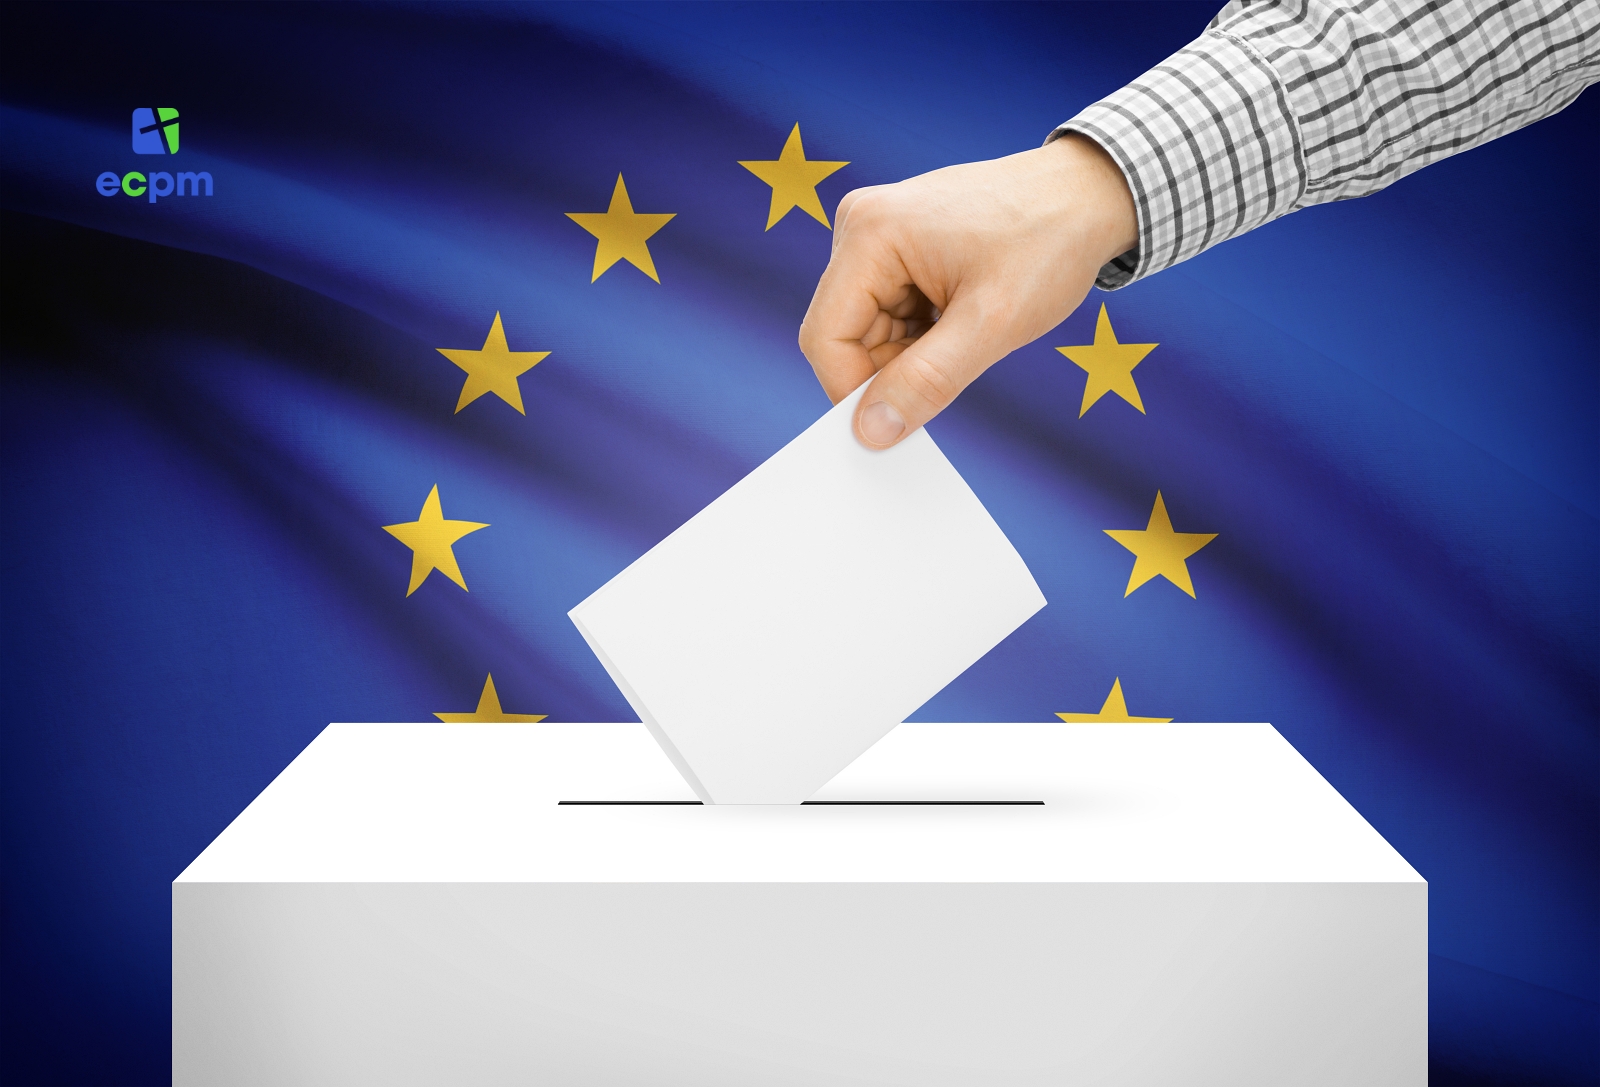 Proposed electoral changes undermine Member States’ sovereignty